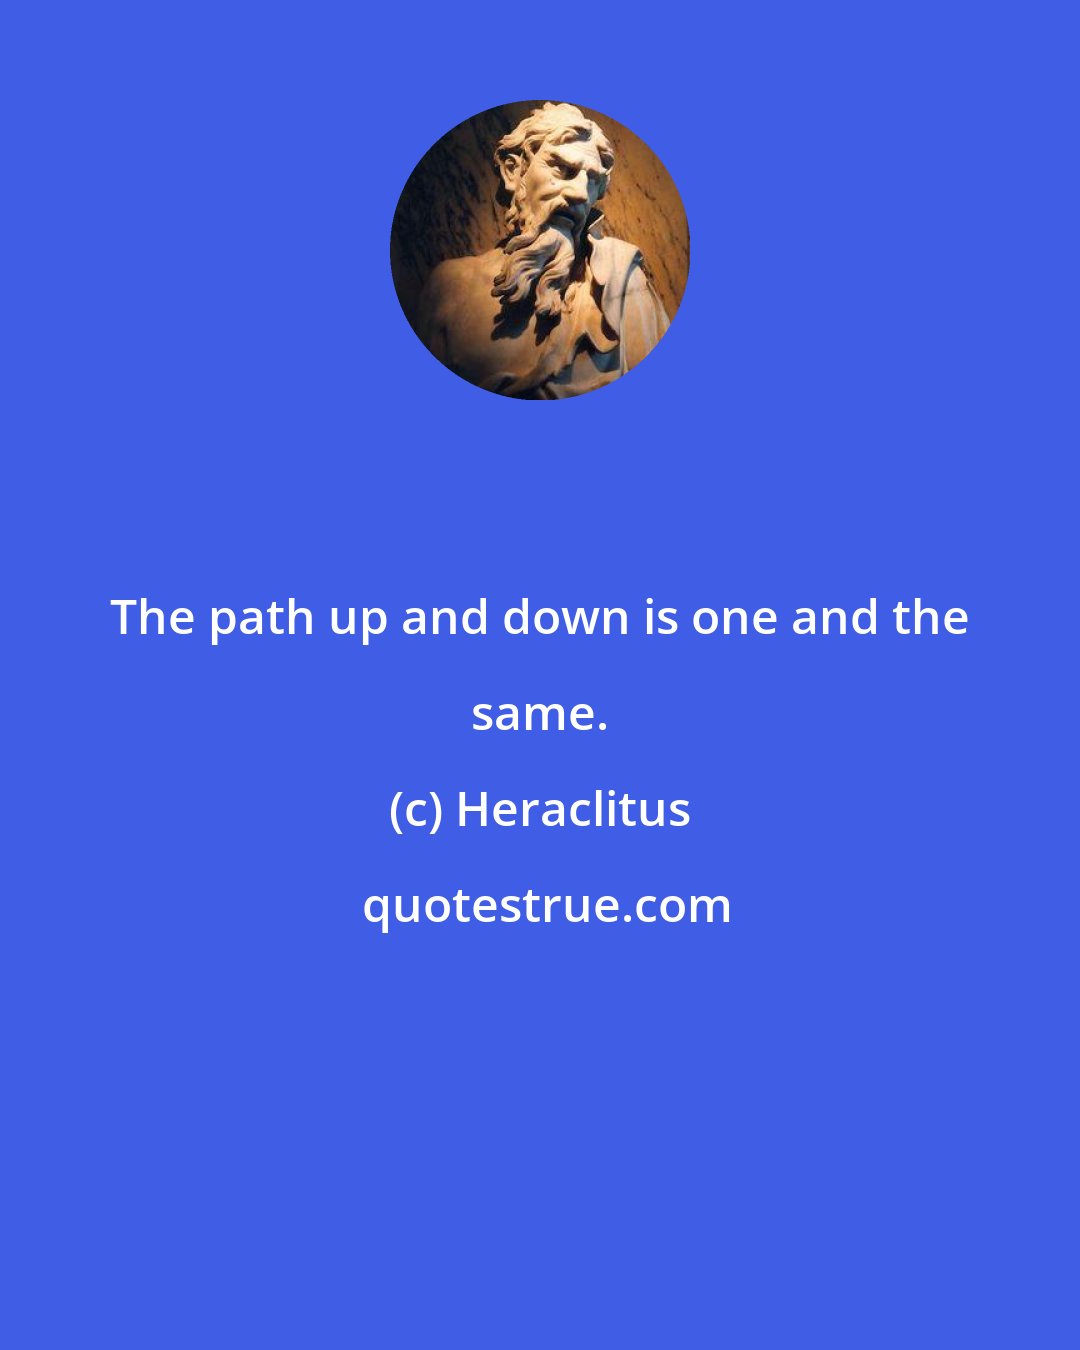 Heraclitus: The path up and down is one and the same.